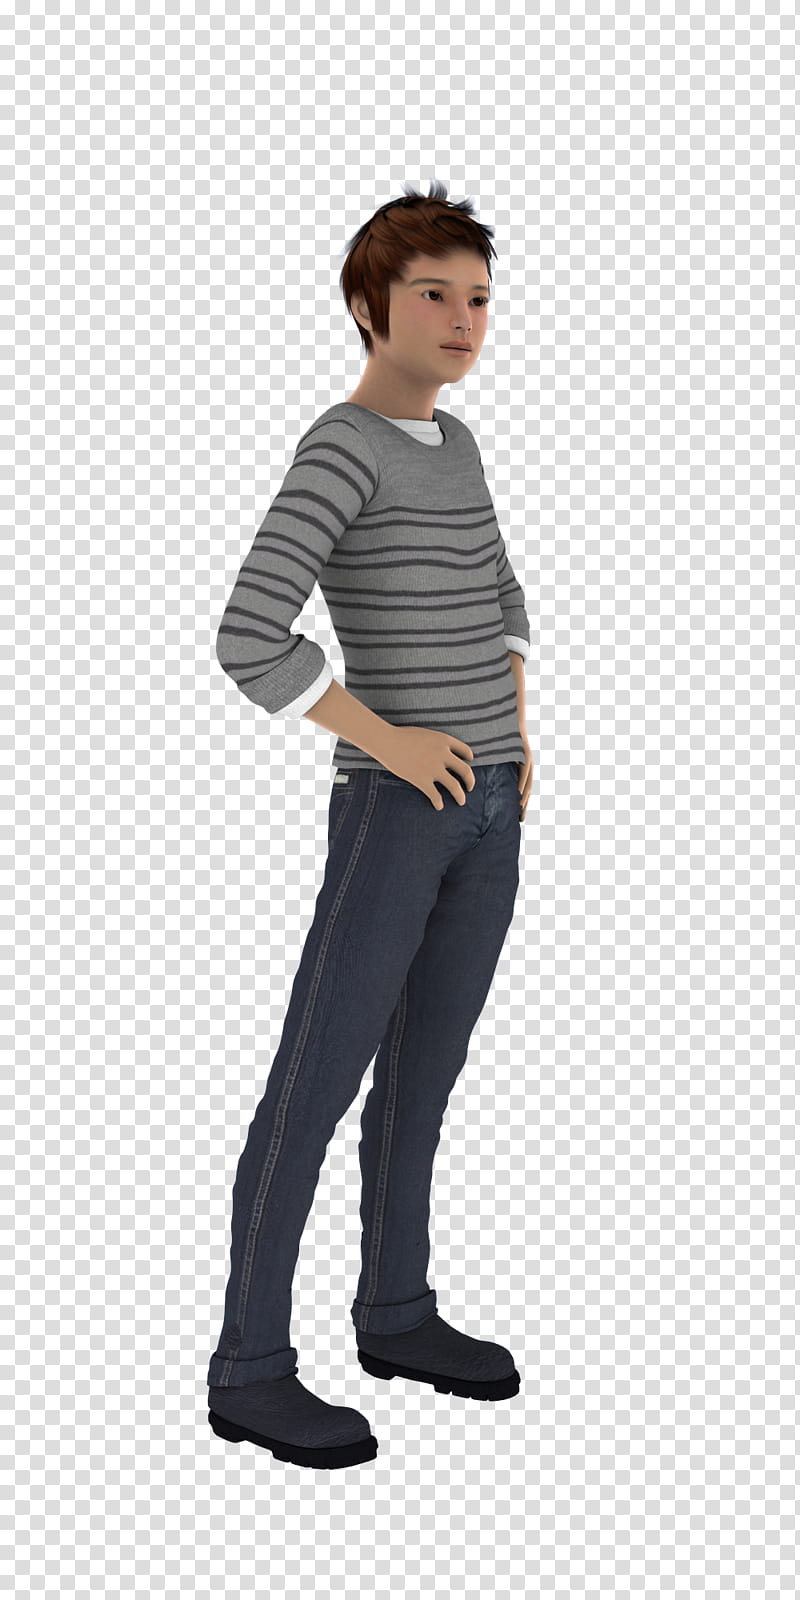 Aaron transparent background PNG clipart